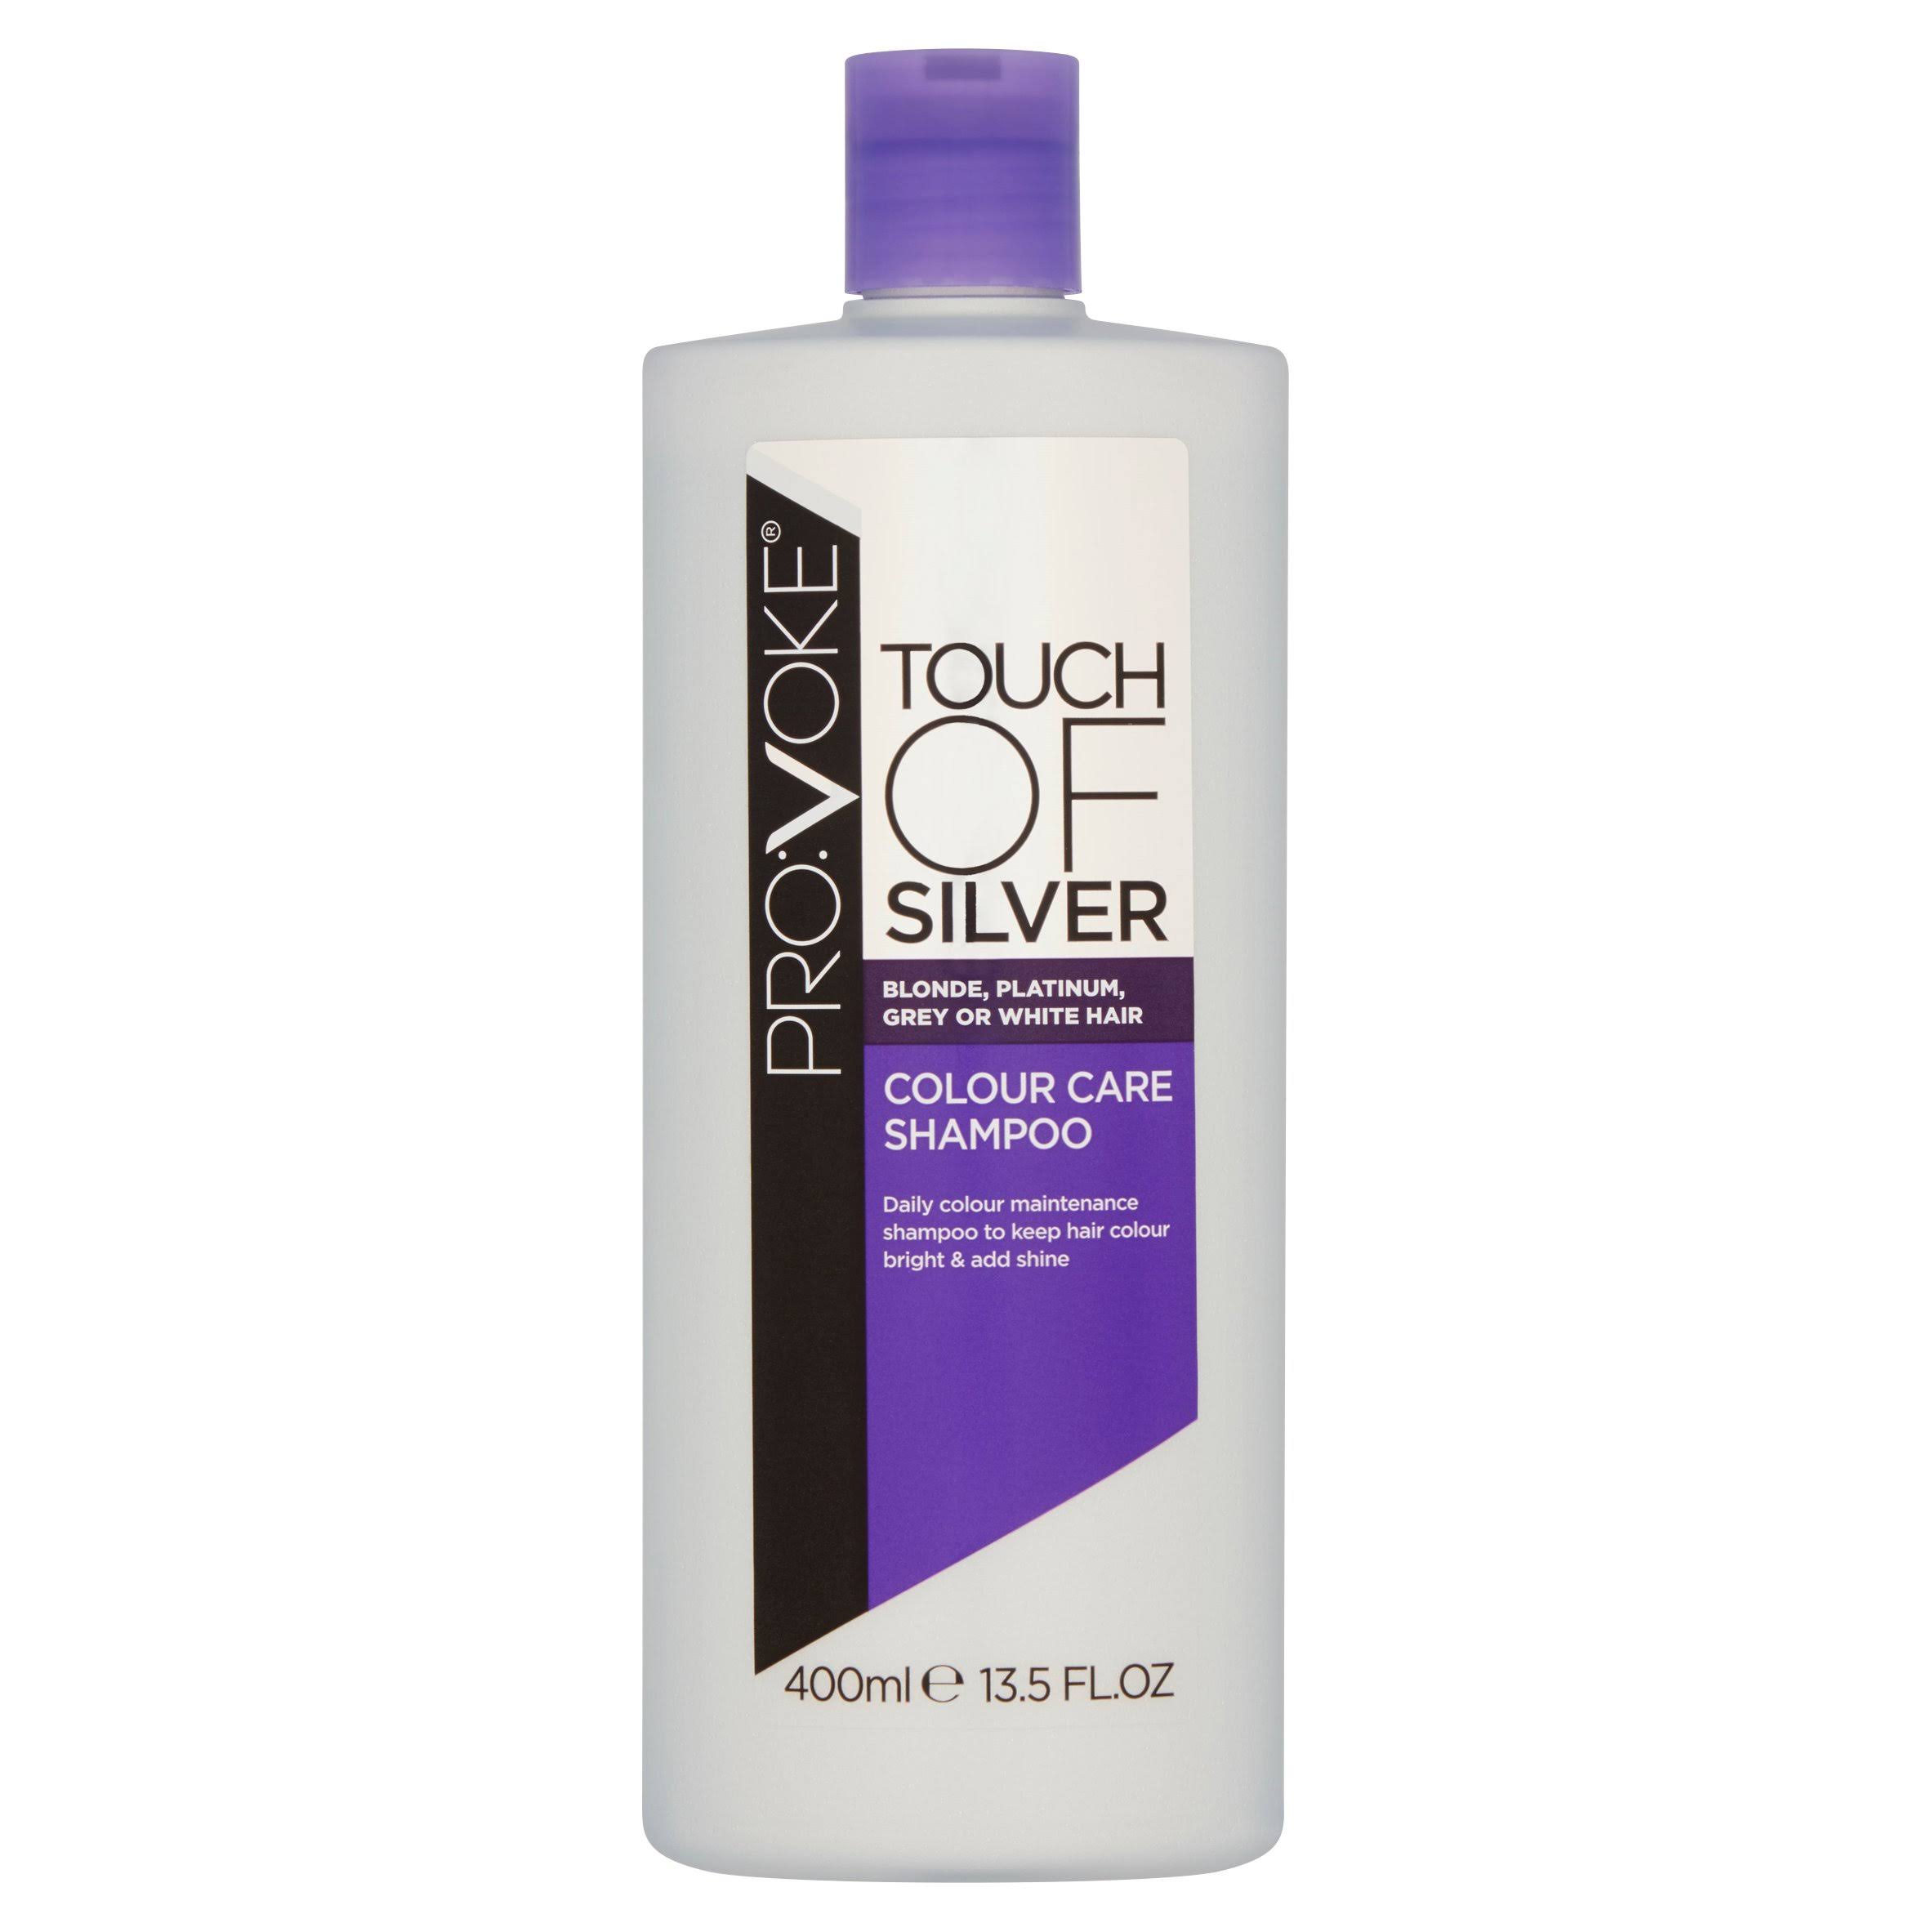 Touch Of Silver Colour Care Shampoo by dpharmacy